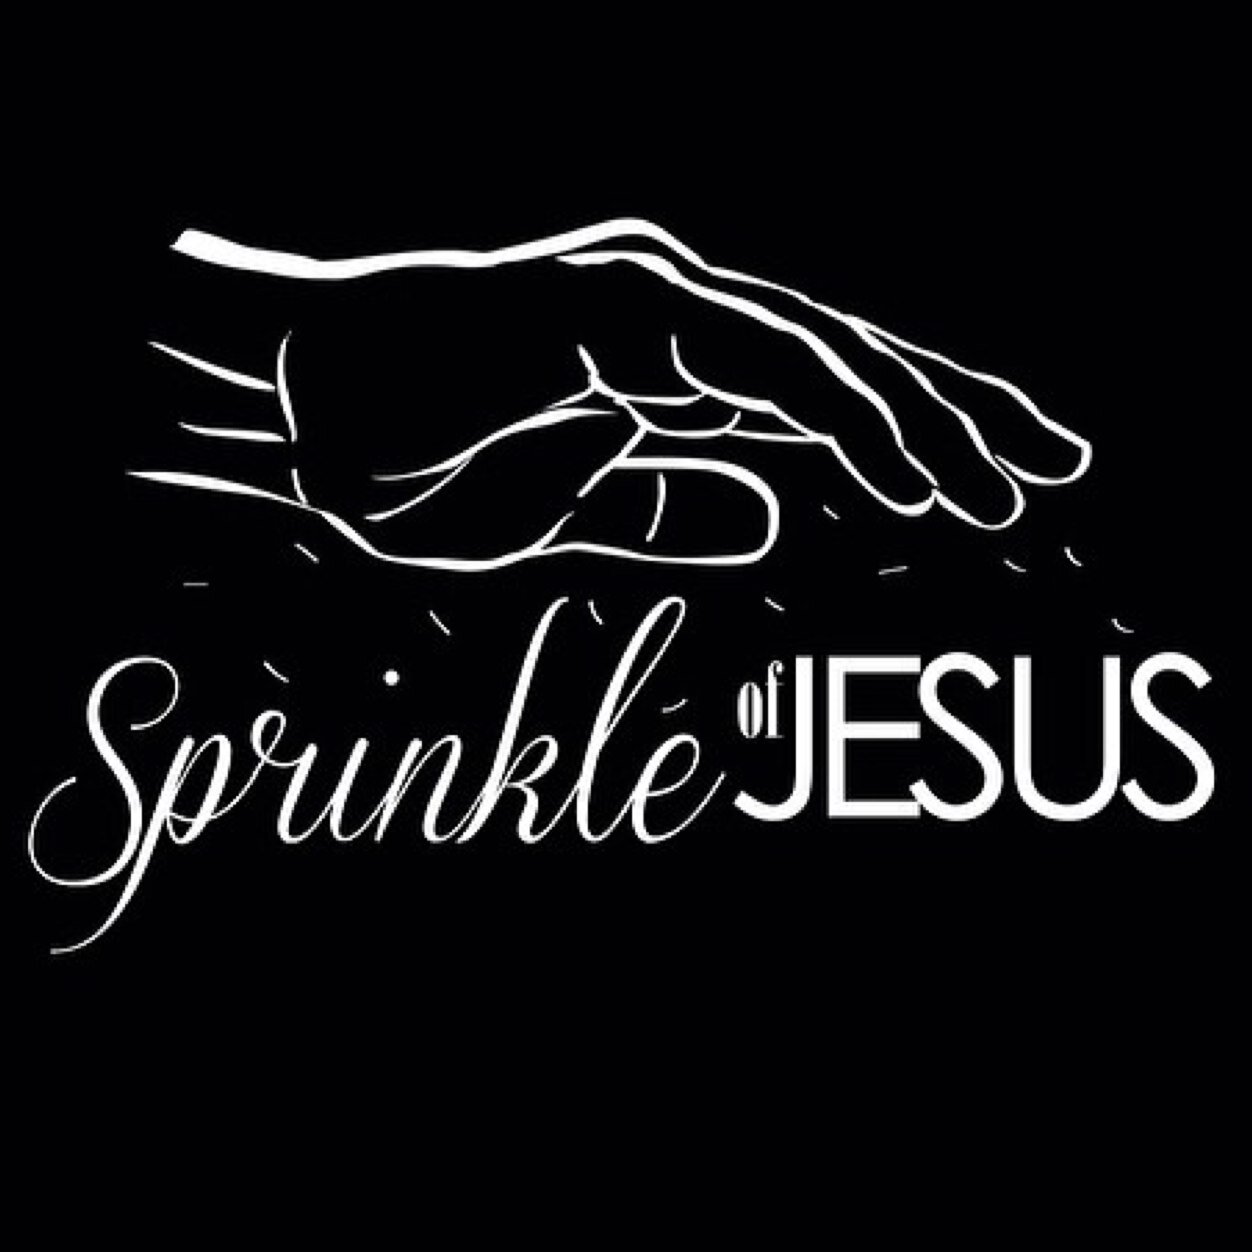 Download the Sprinkle of Jesus mobile app available on Google Play and the iOS App Store.